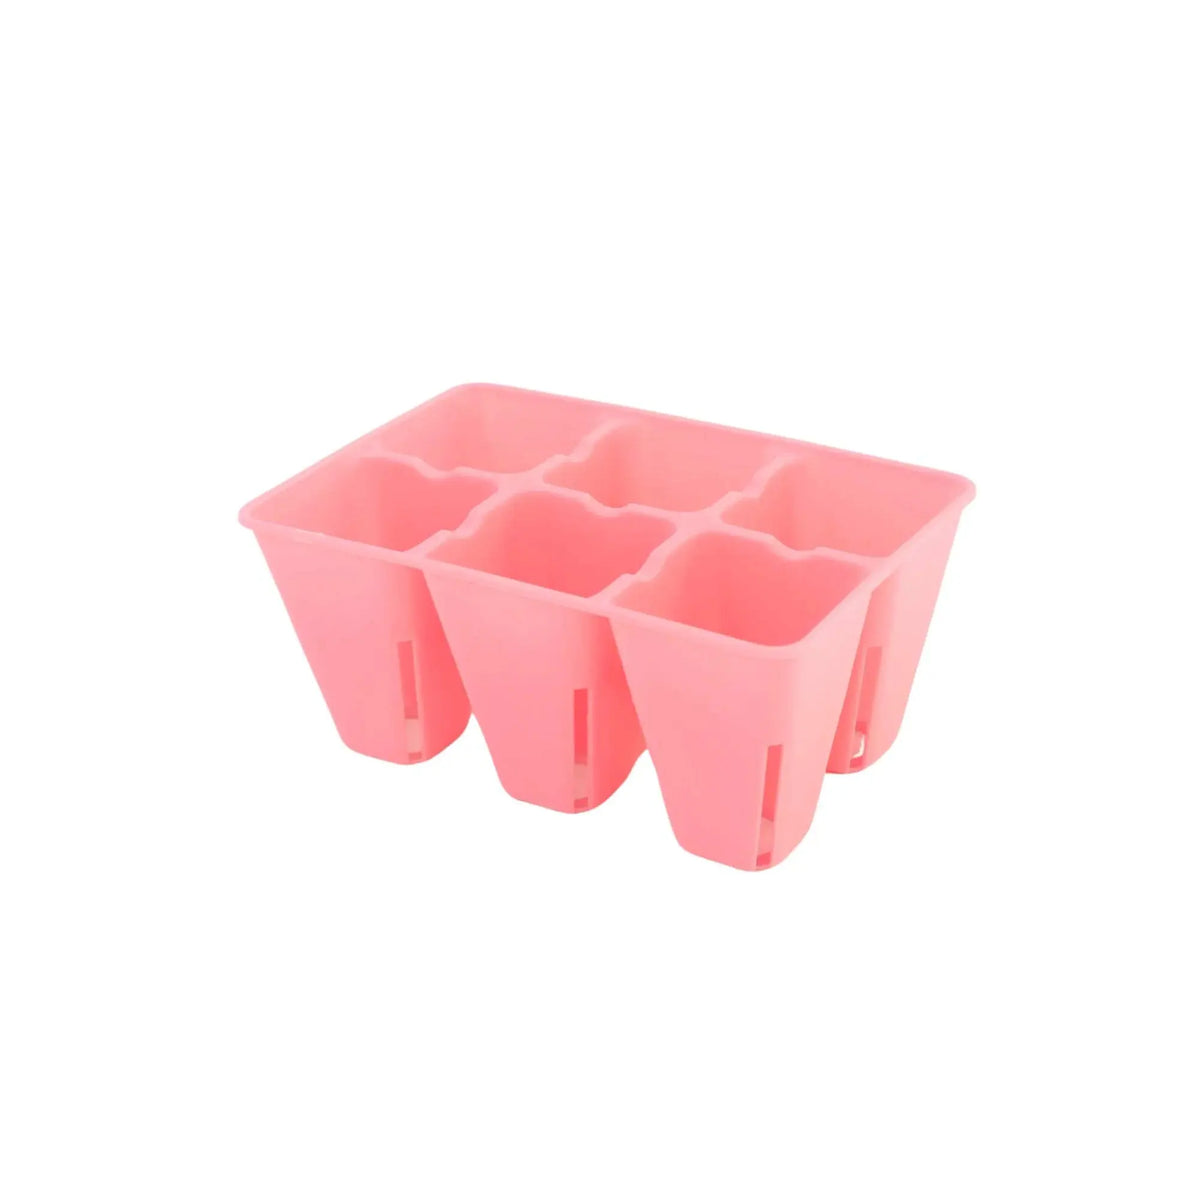 Bootstrap Farmer 6 Cell Plug Tray Inserts | Assorted Colors